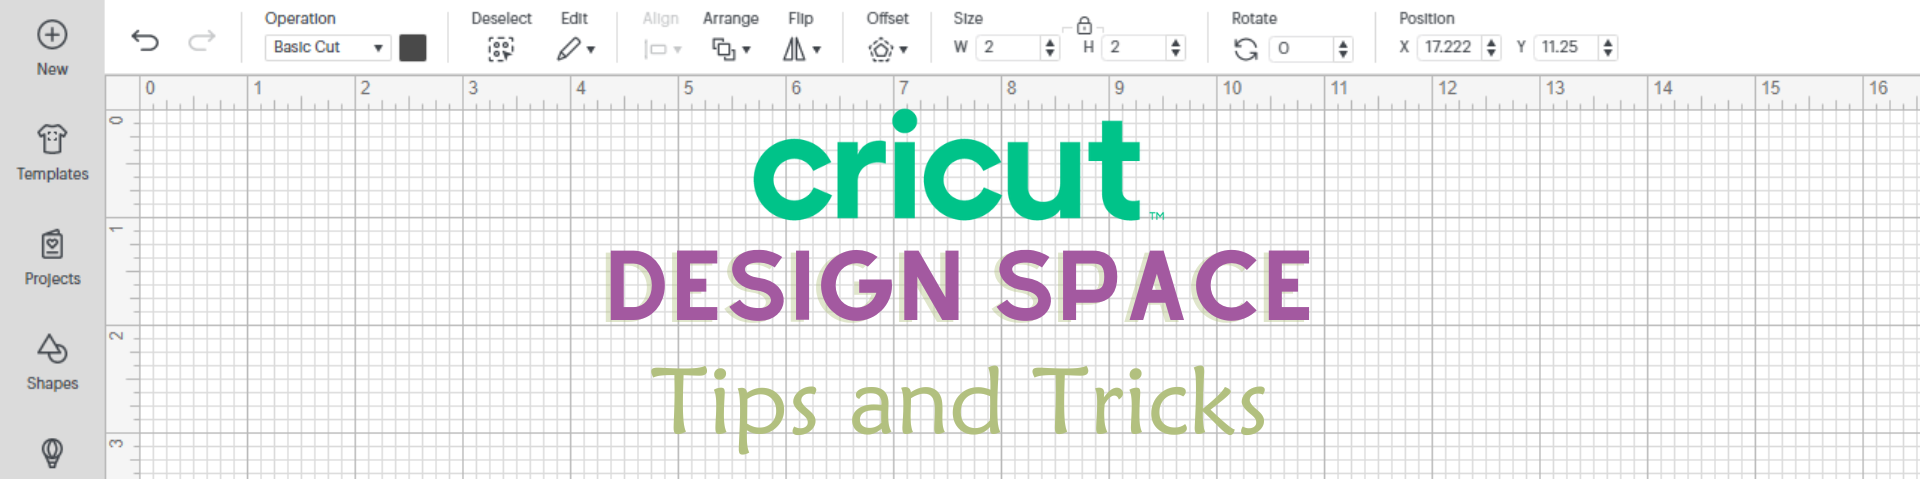 How to Move Objects on the Preview Mat Screen in Cricut Design Space